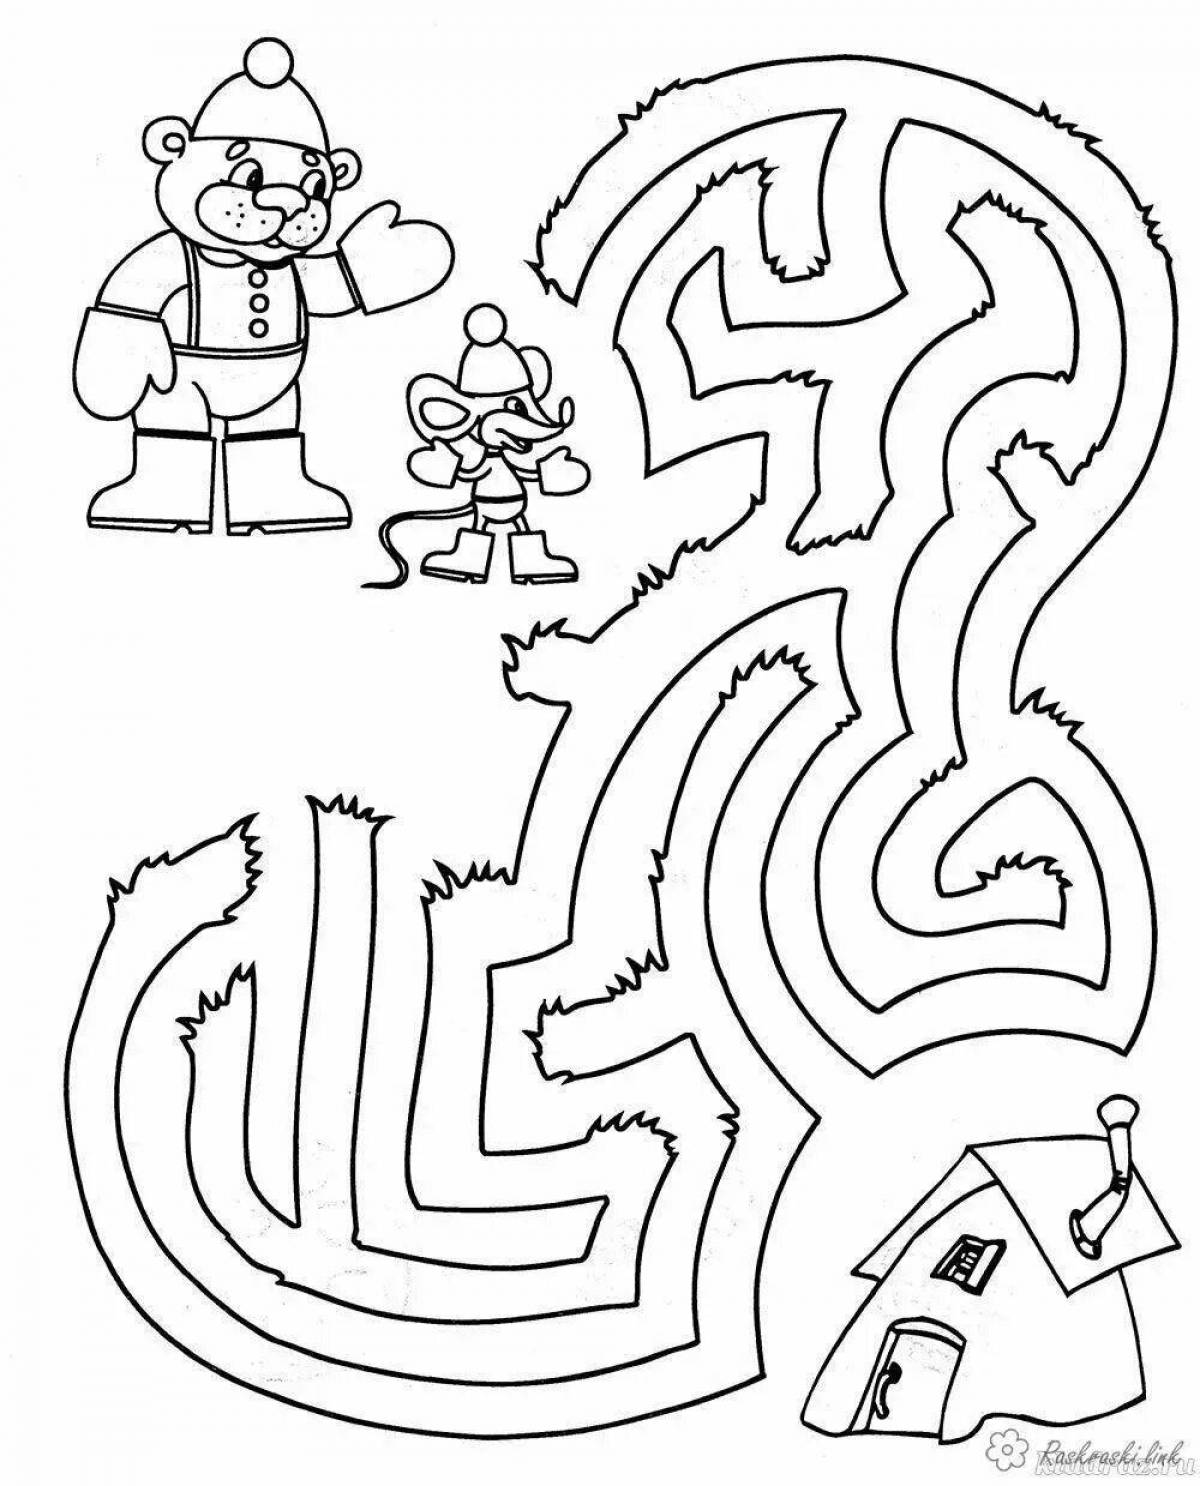 Mazes for children 4 5 years old #16